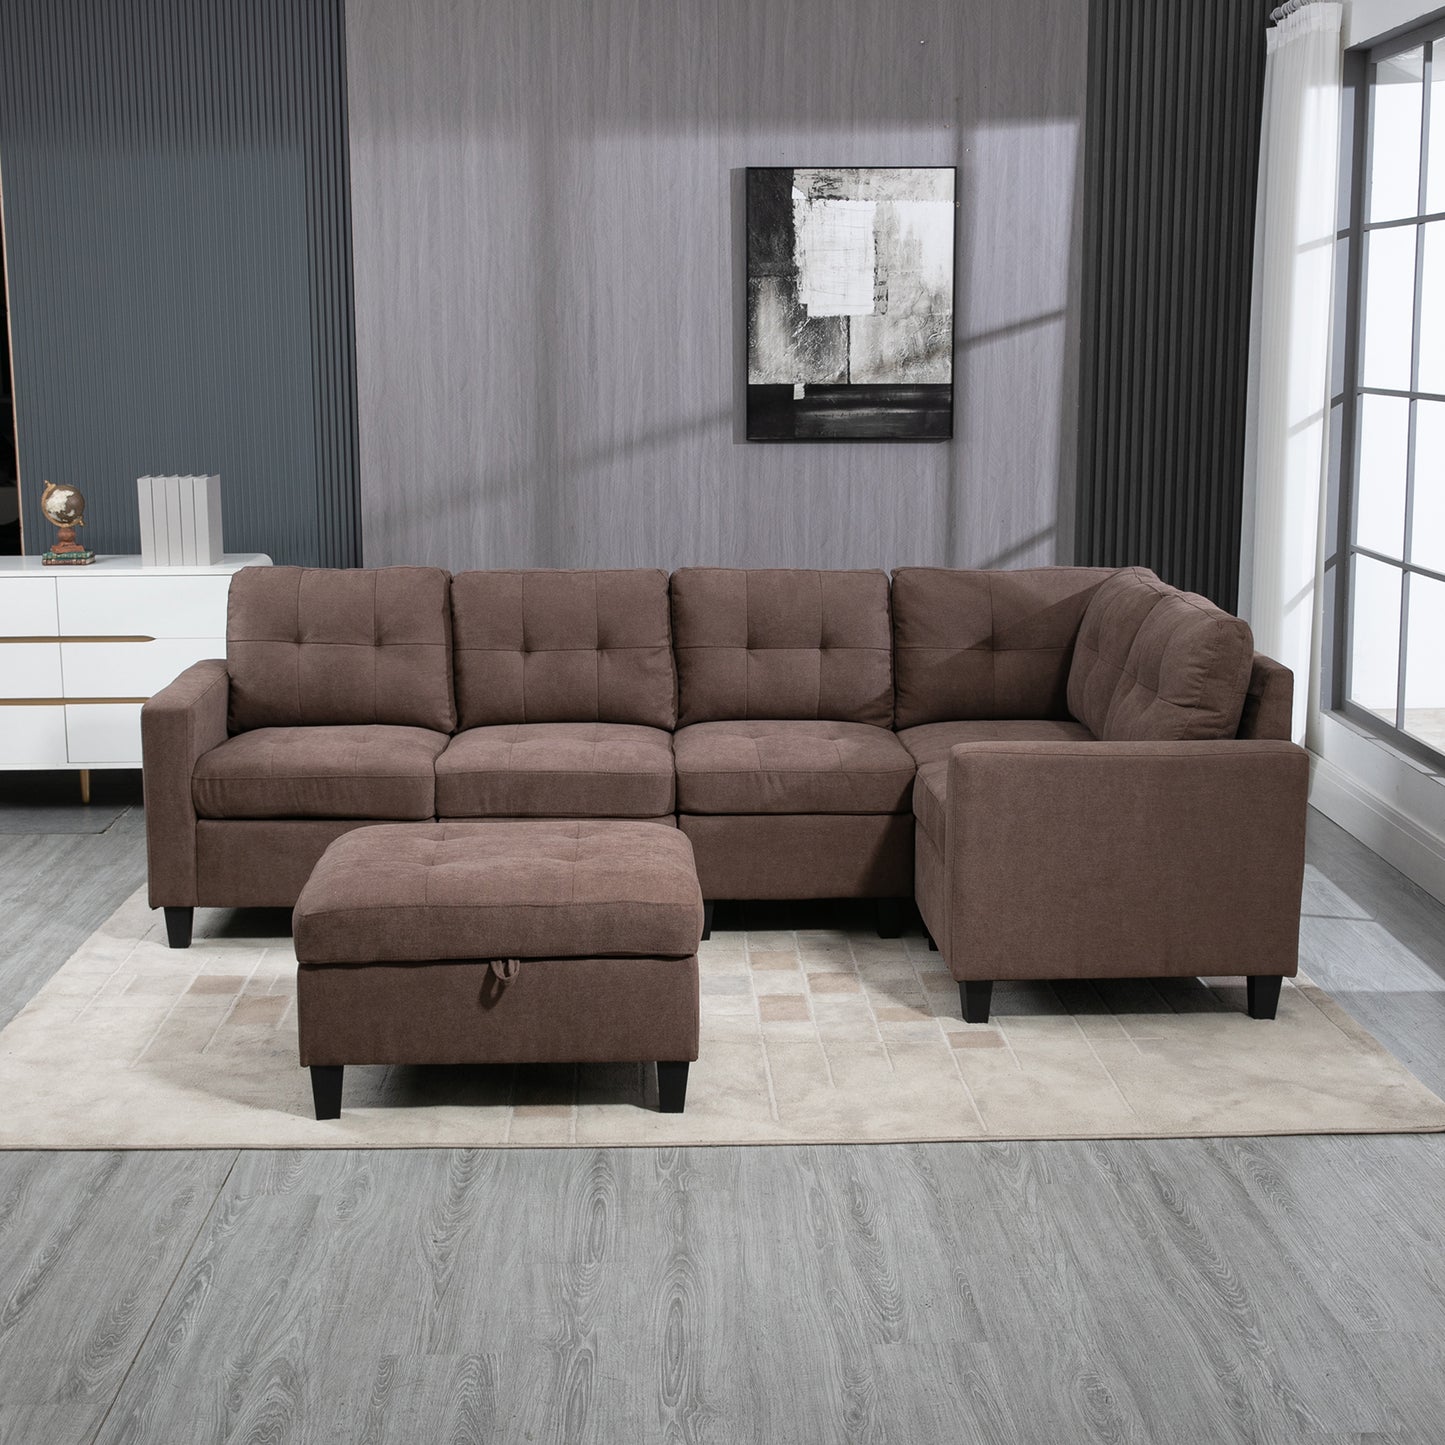 PAPROOS Modular Sectional Couches and Sofas with Storage, Sectional Sofa L Shaped Sectional Couch With Storage Ottomans Table, Modern Sofa Set for Living Room, Brown